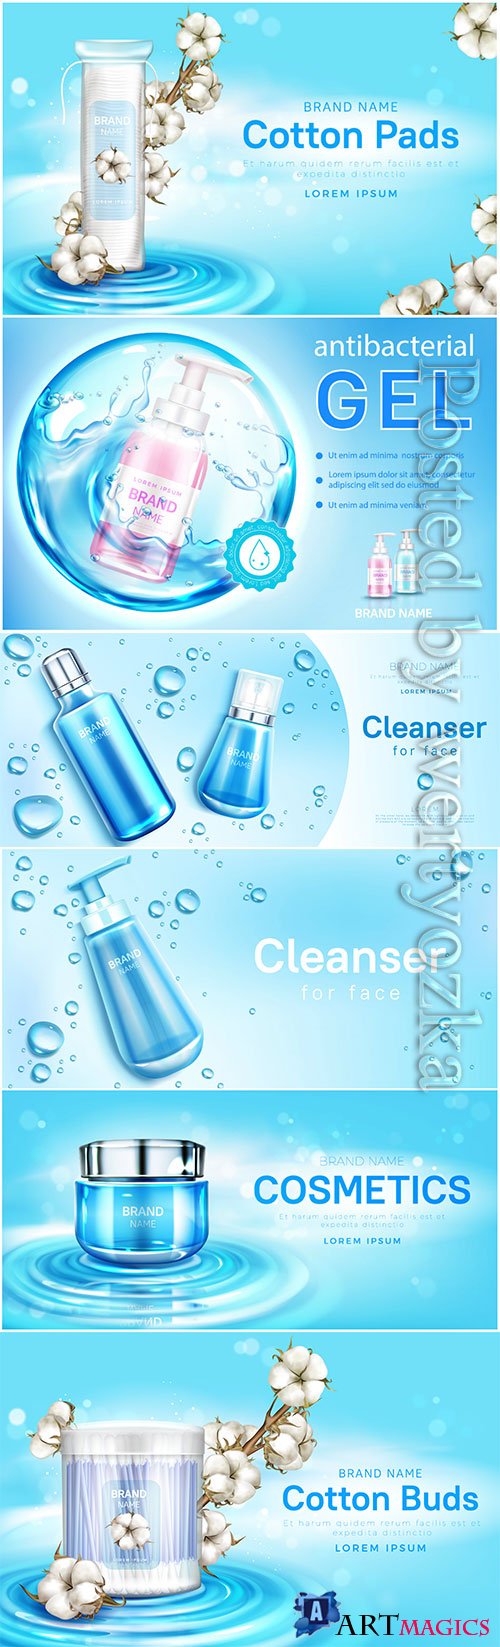 Cosmetic care products advertising poster in vector